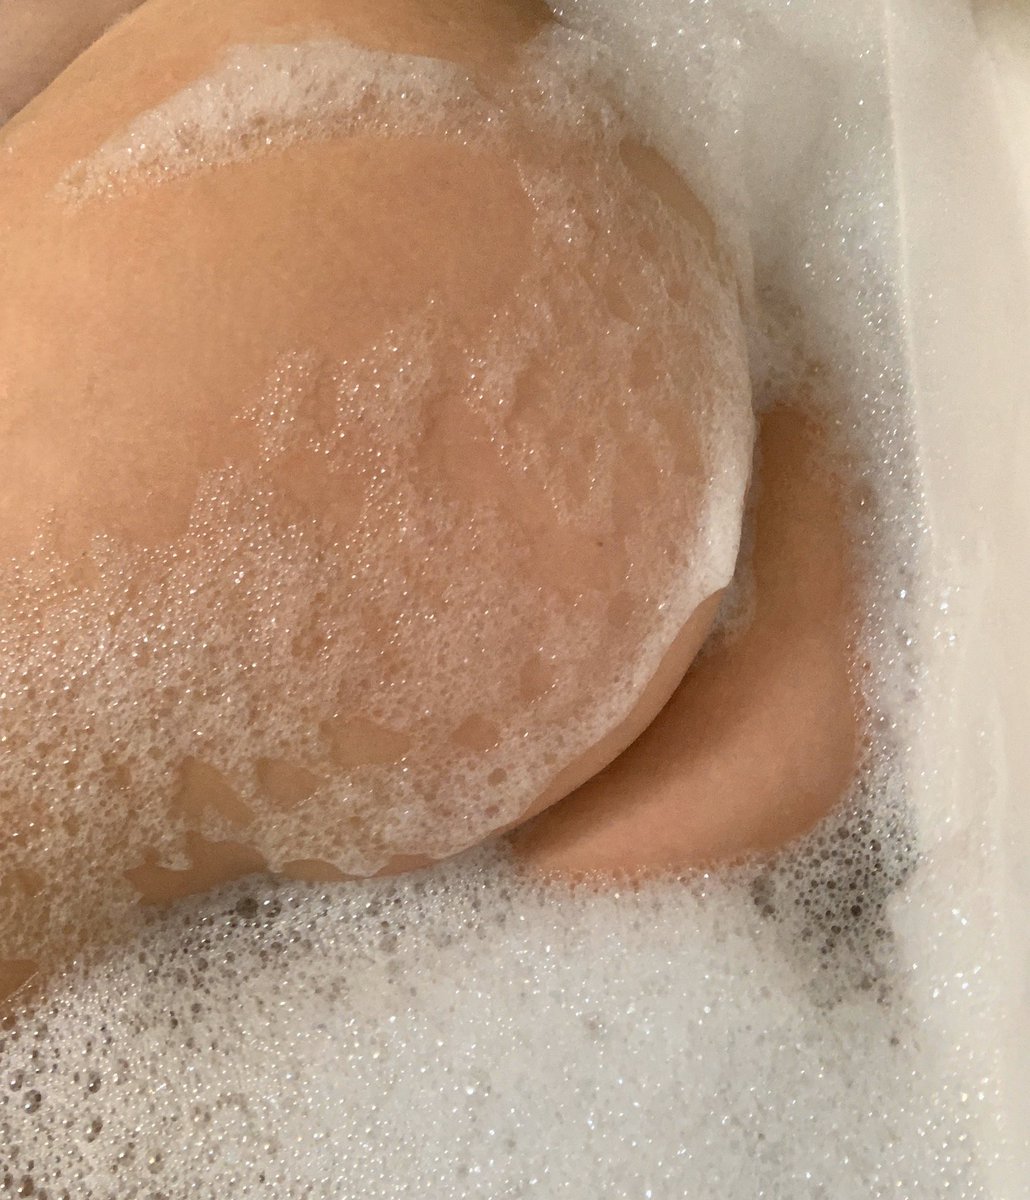 #Bubblebath #boobs and side view of my #ass. I missed #NationalDrinkWineDay yesterday, so I’m making up for it tonight. Look how much #hot water brings out the veins in my tits. Weird! Oh well...I missed you, Loves!